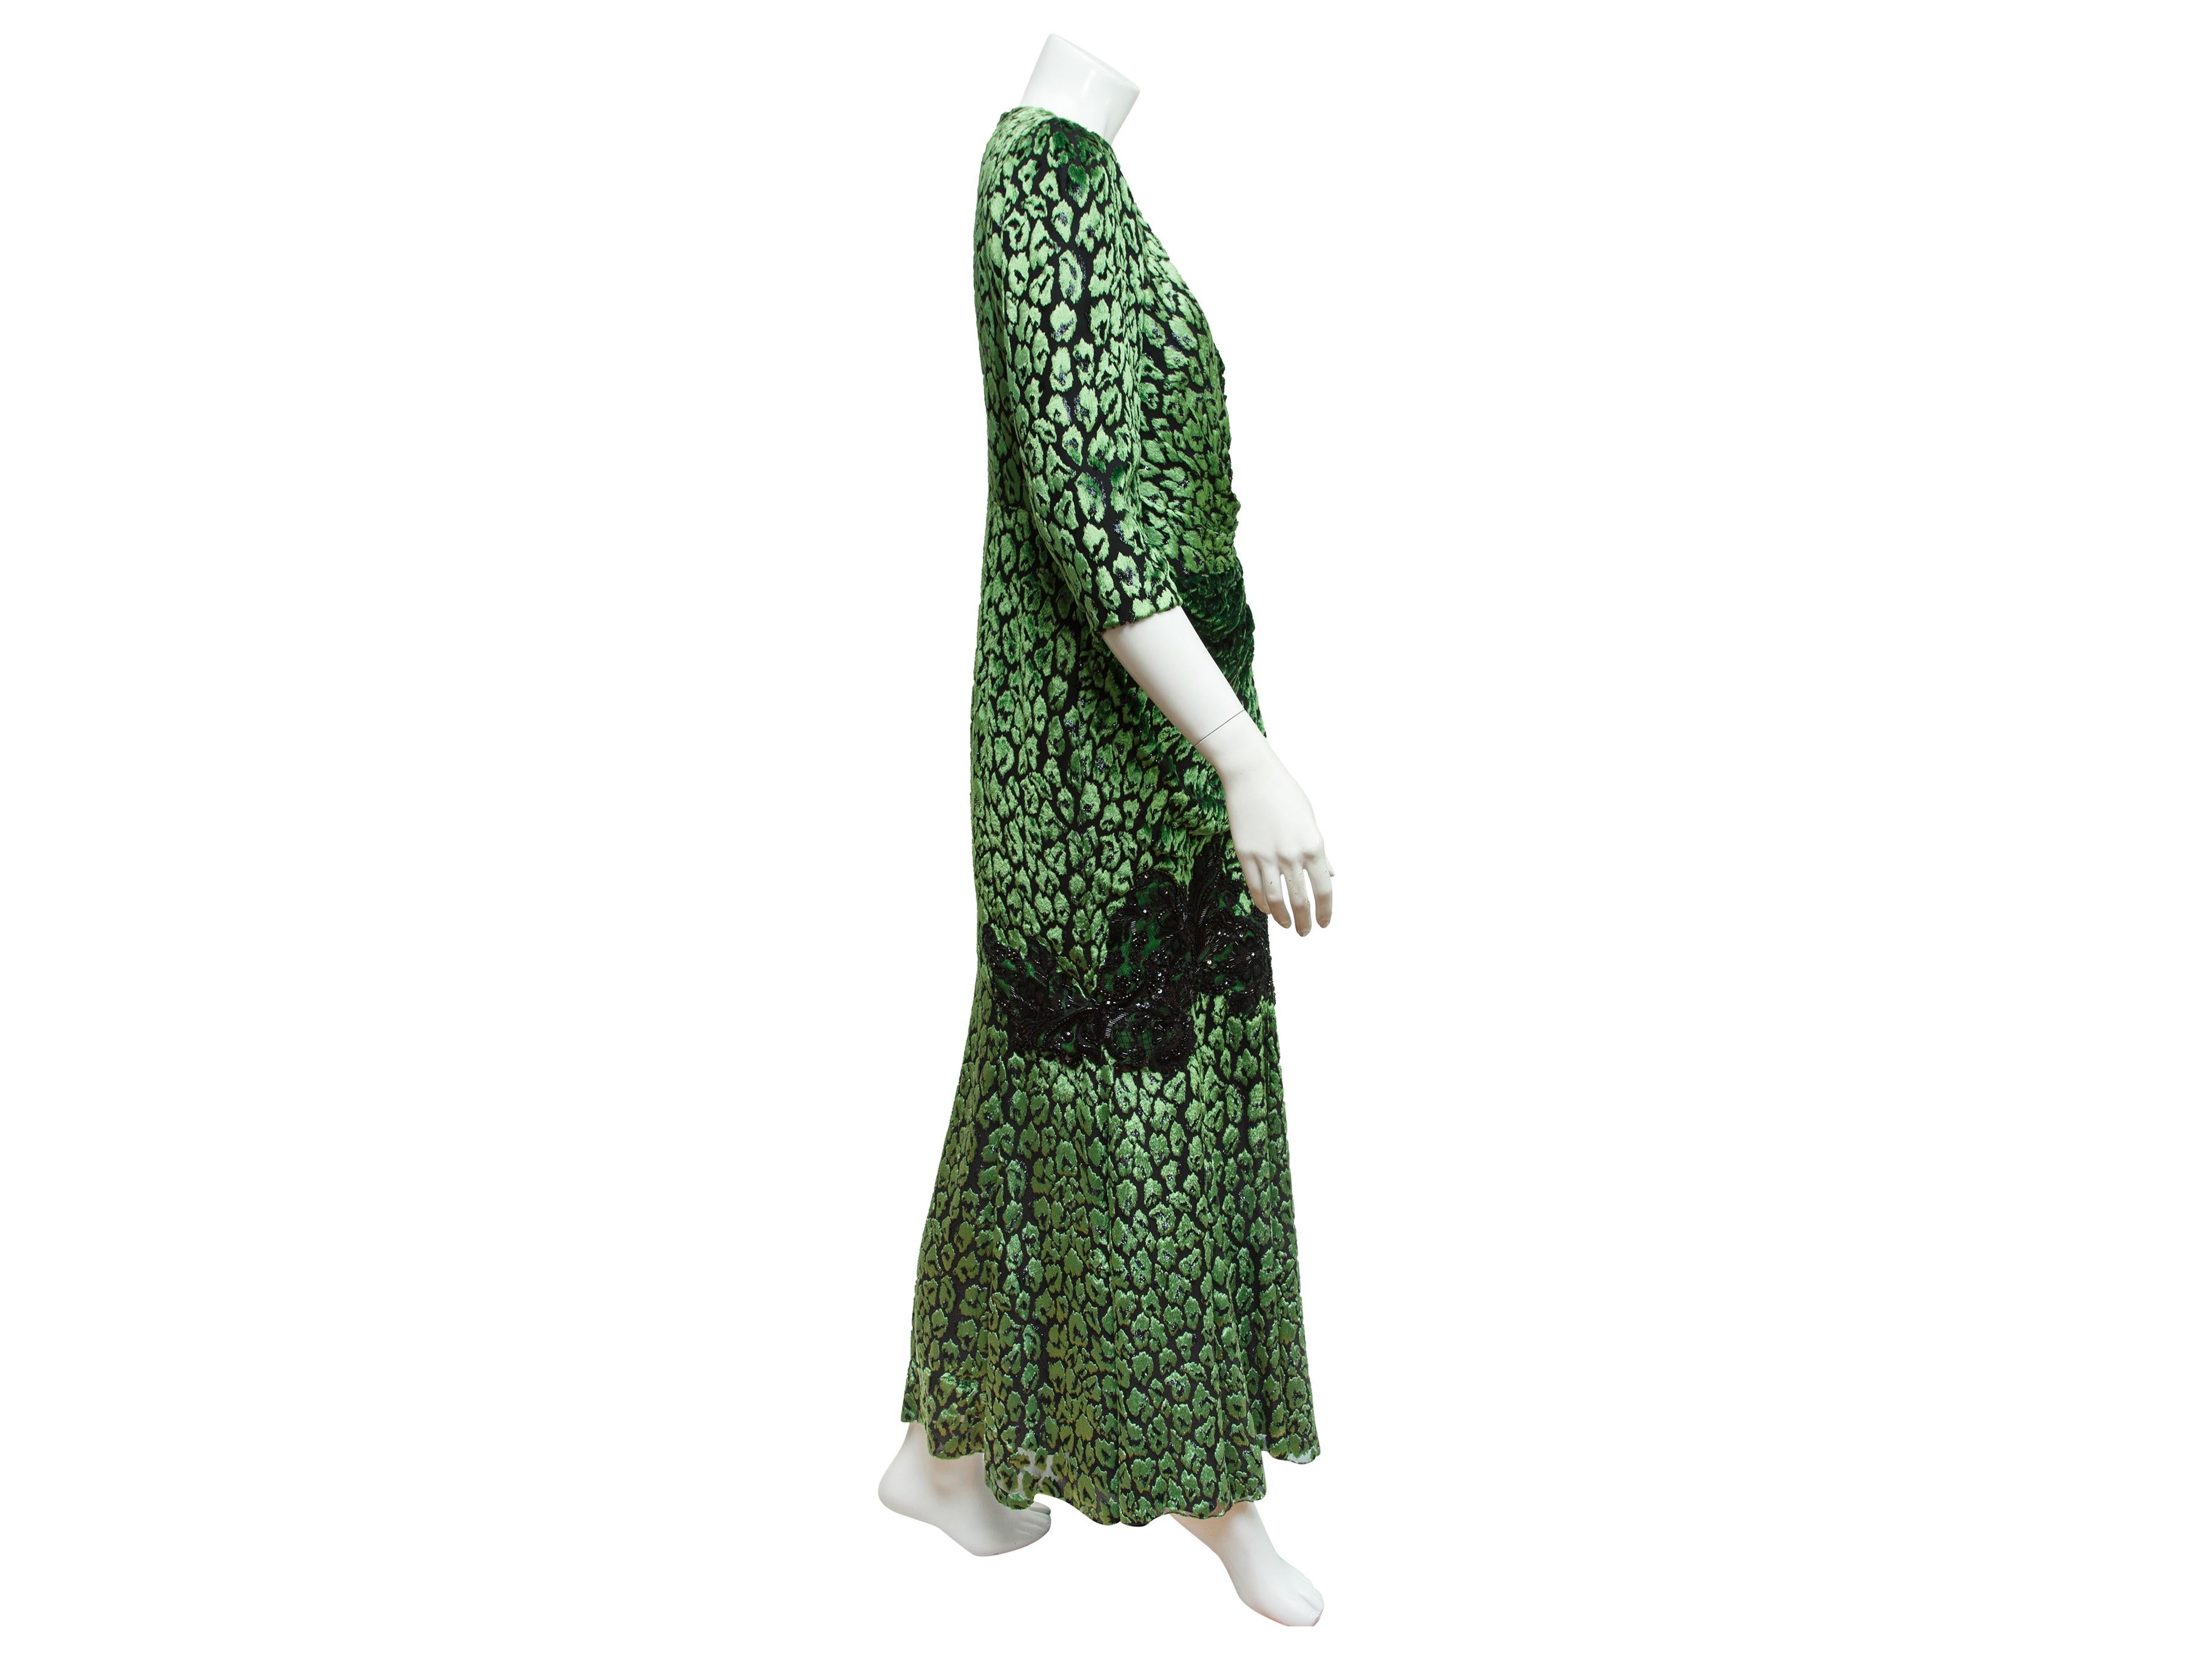 Product details:  Metallic green animal-print gown by Andrew Gn.  Accented with black beaded lace panels.  V-neck.  Elbow-length sleeves.  Surplice bodice.  Concealed back zip closure.  38